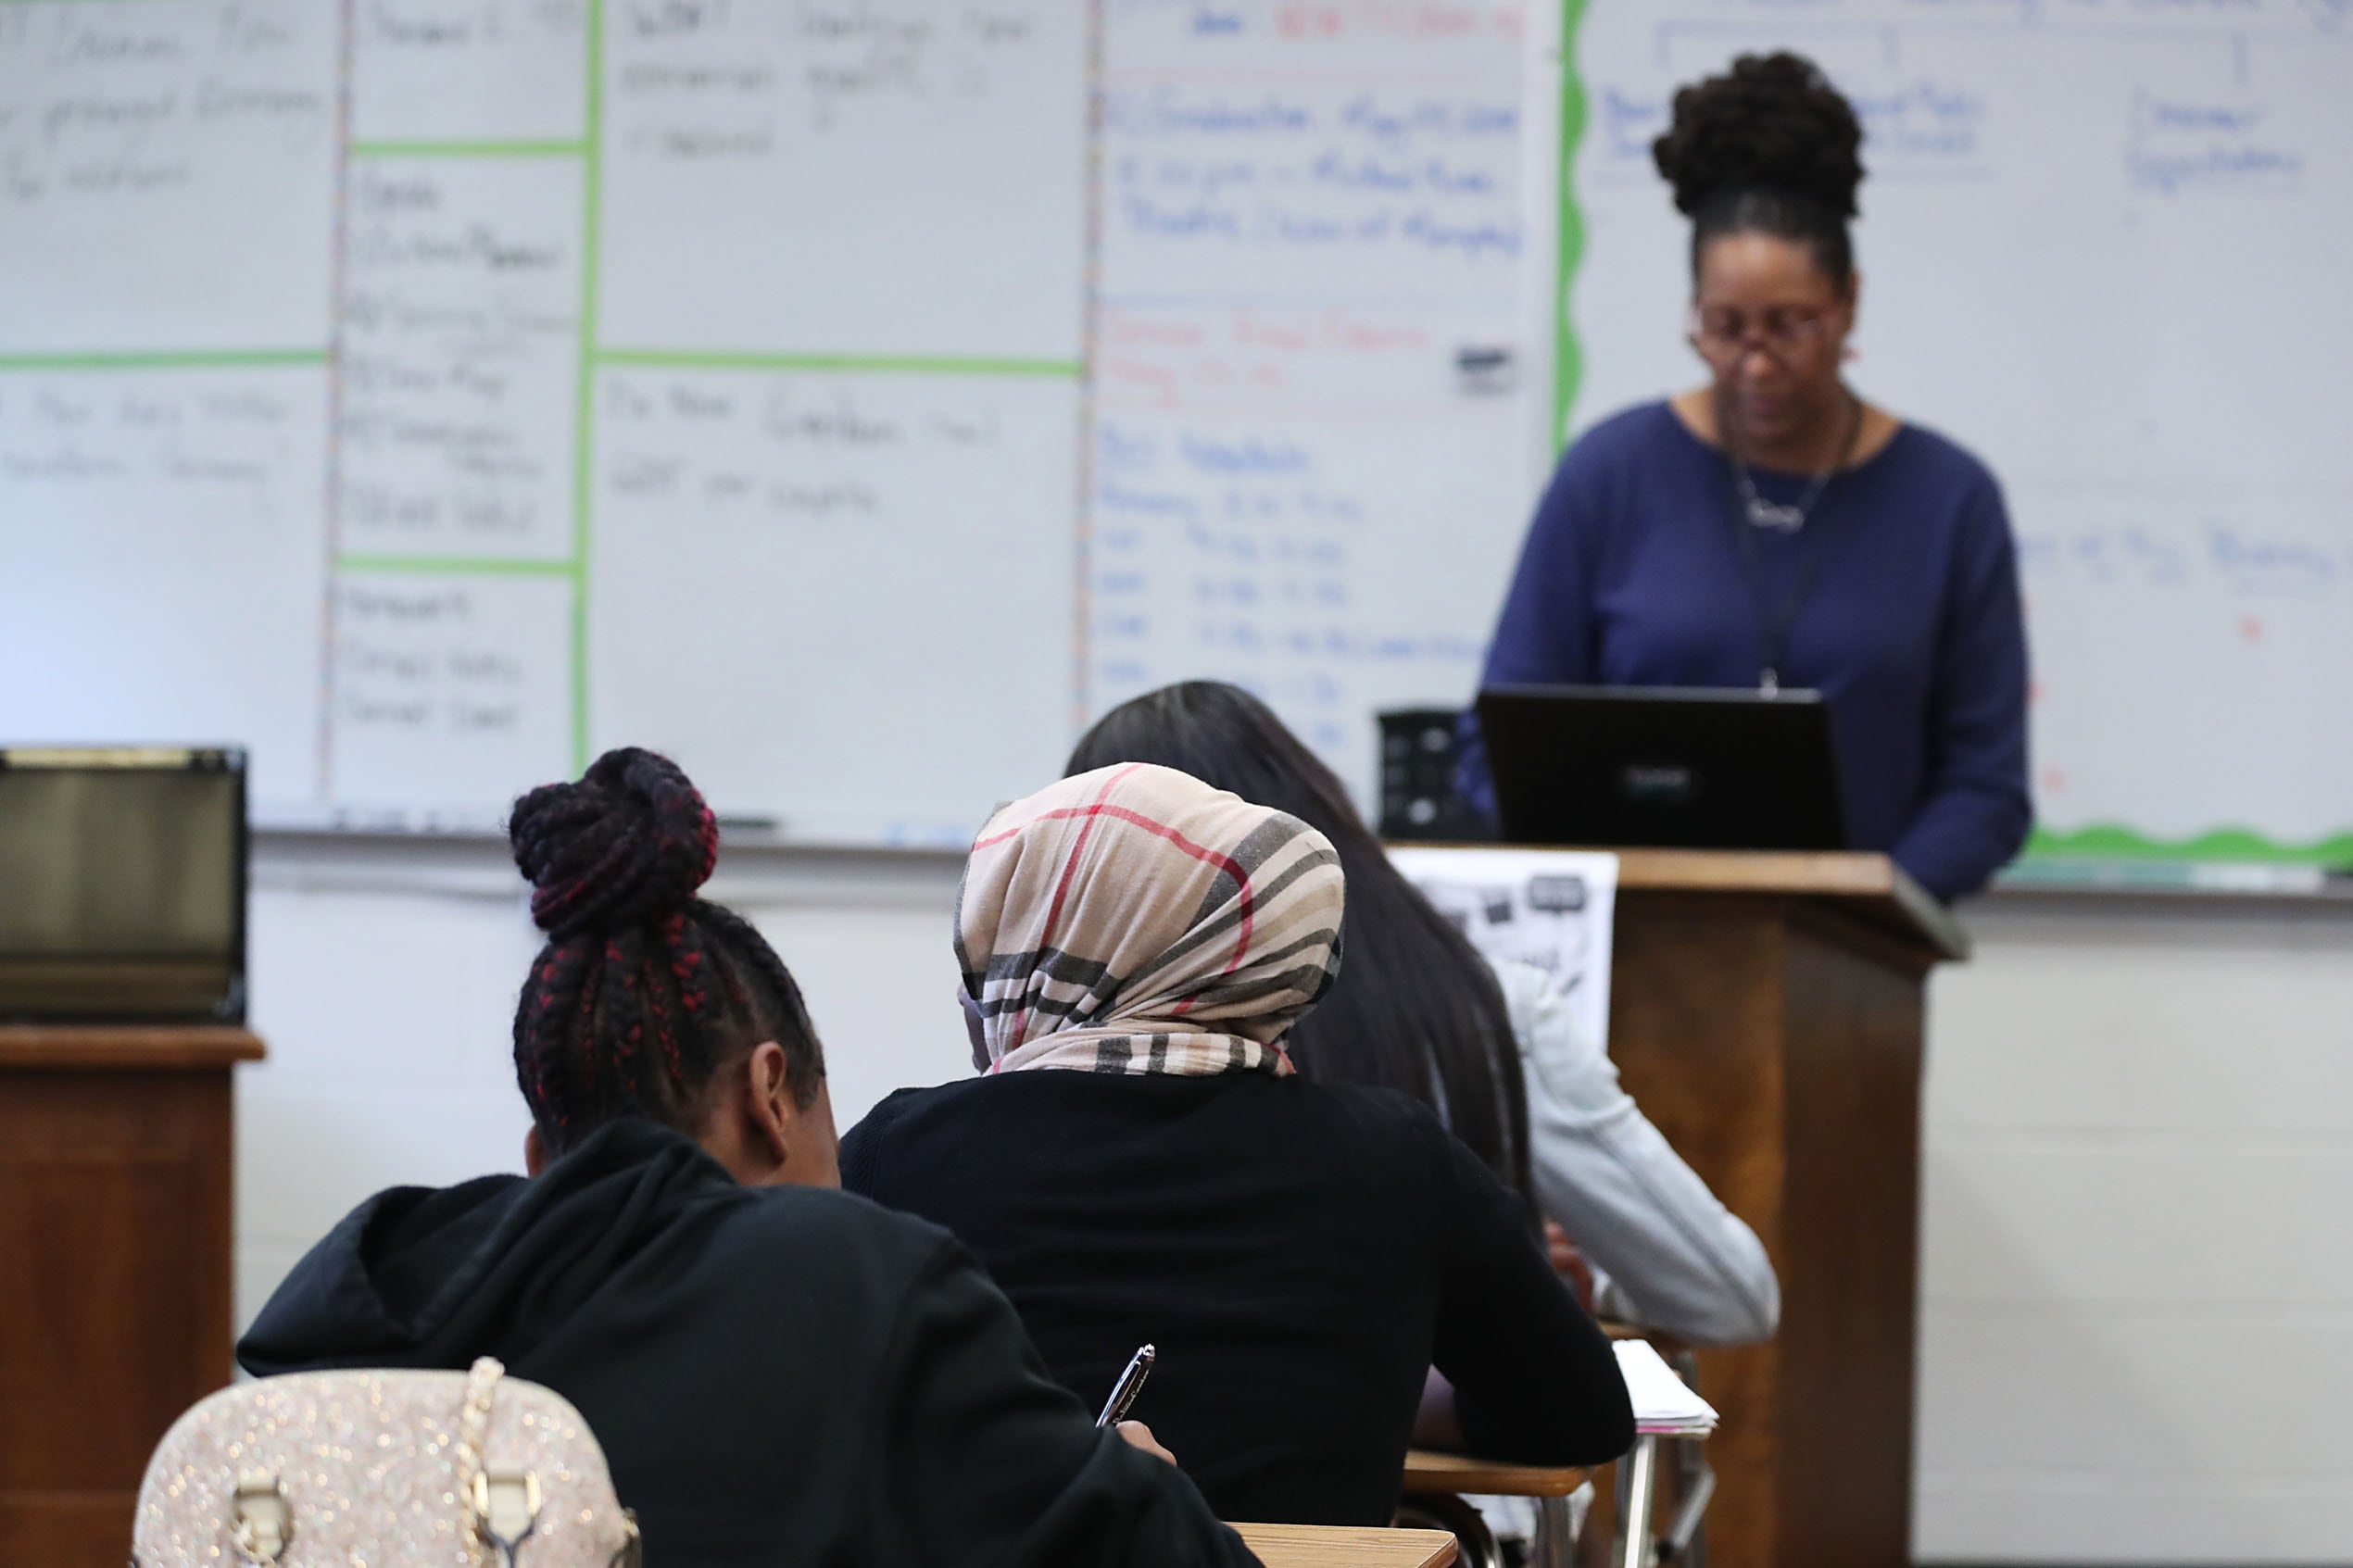 Teacher stands at a podium in front of students in a classroom